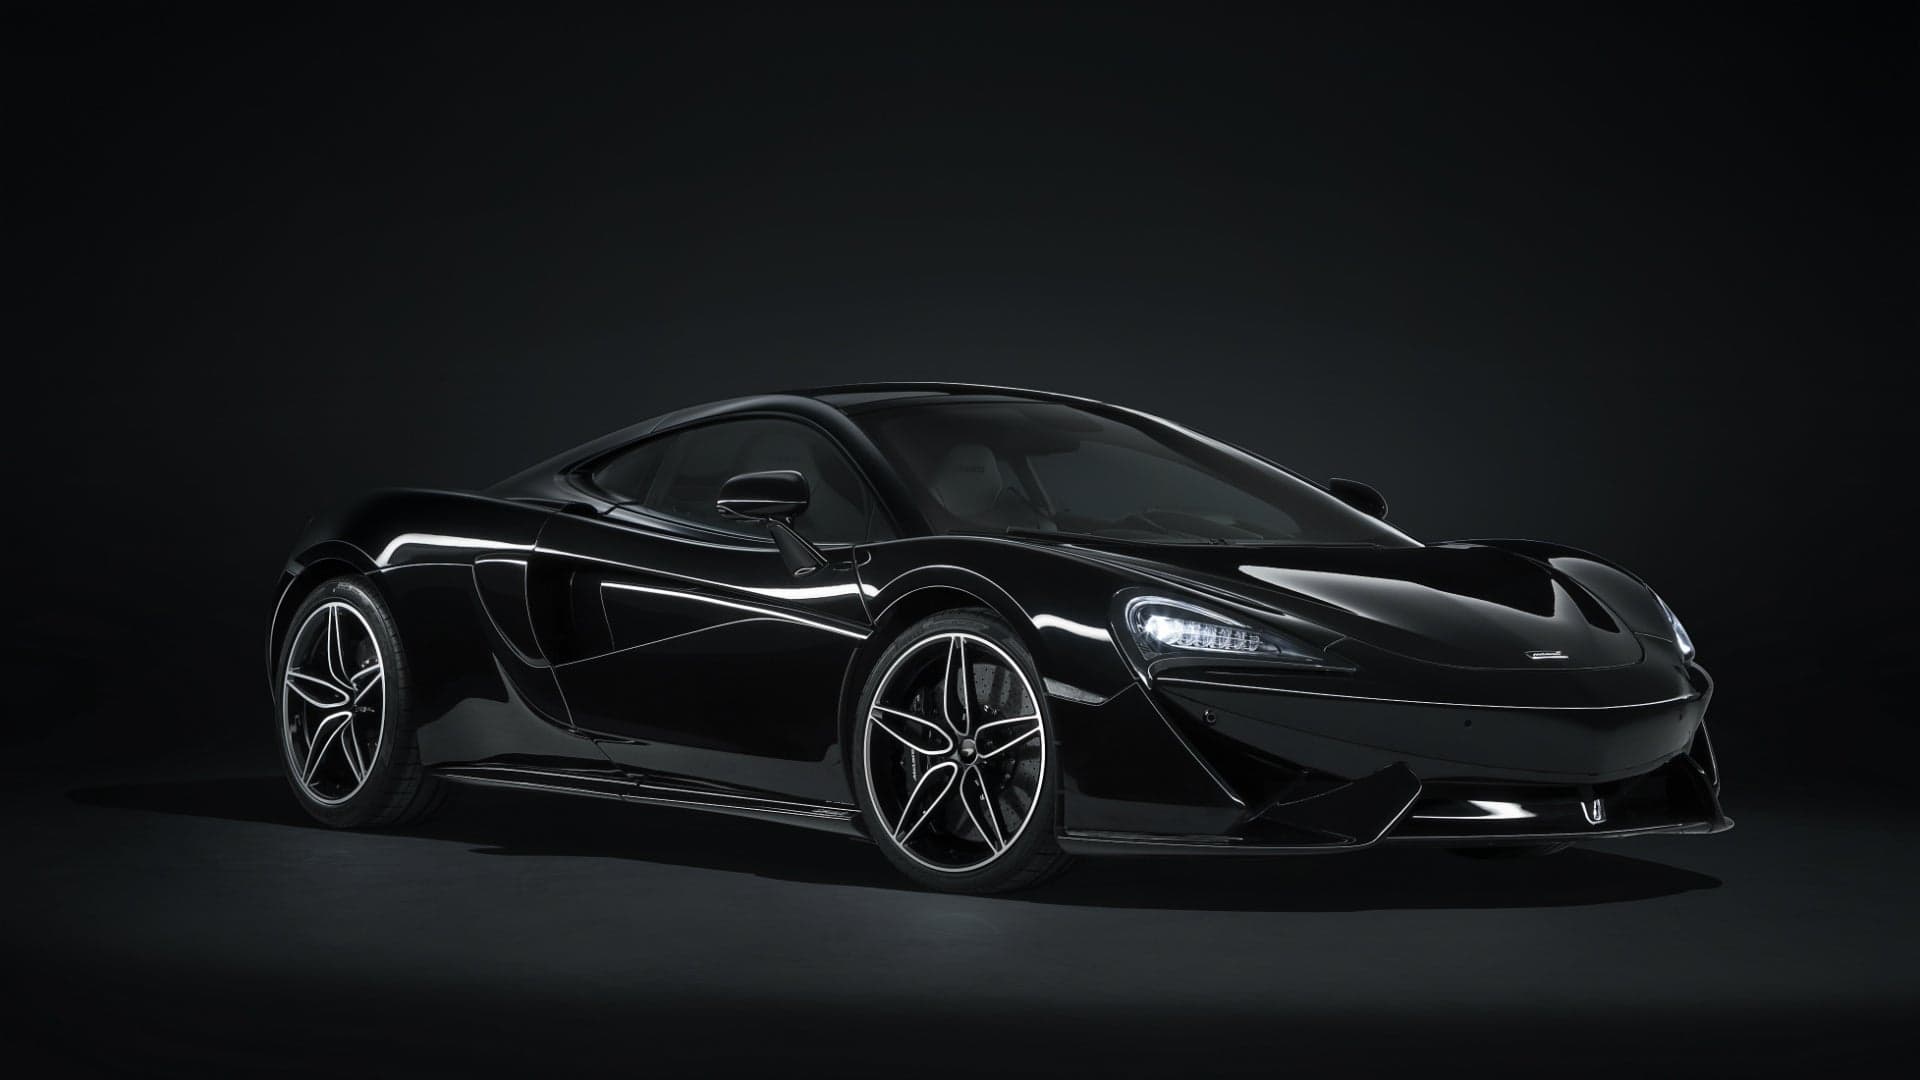 McLaren Builds Special Edition Carbon Black 570GT, Limited to 100 Units